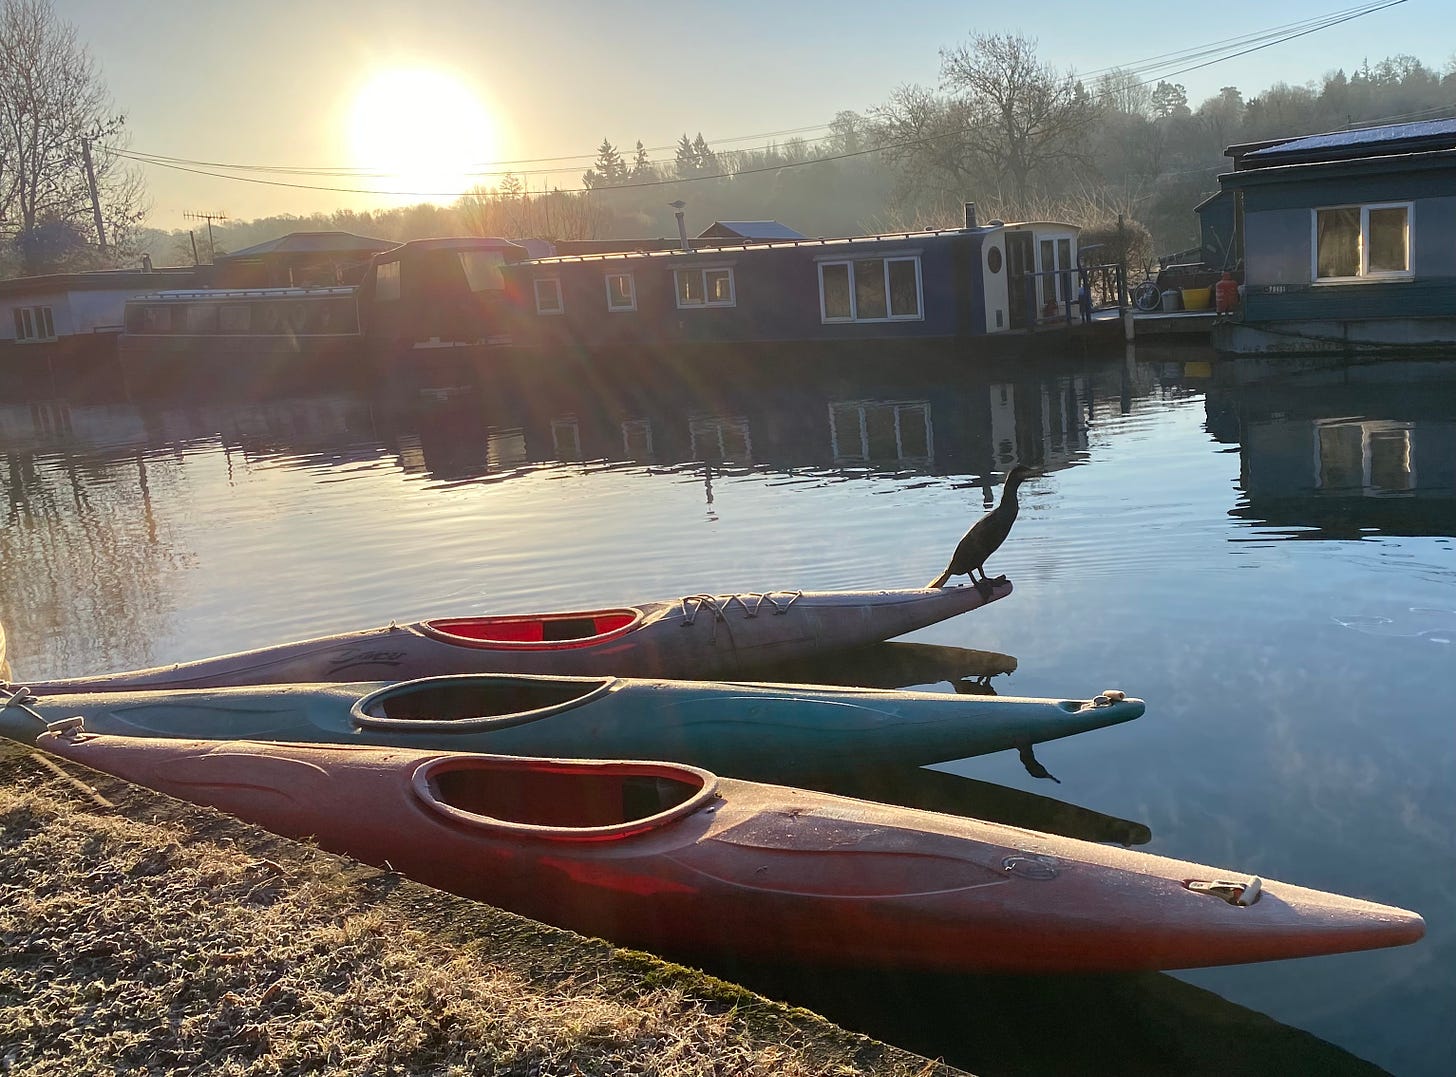 Winter scene with sun setting over canoes by side of canal on waters edge.